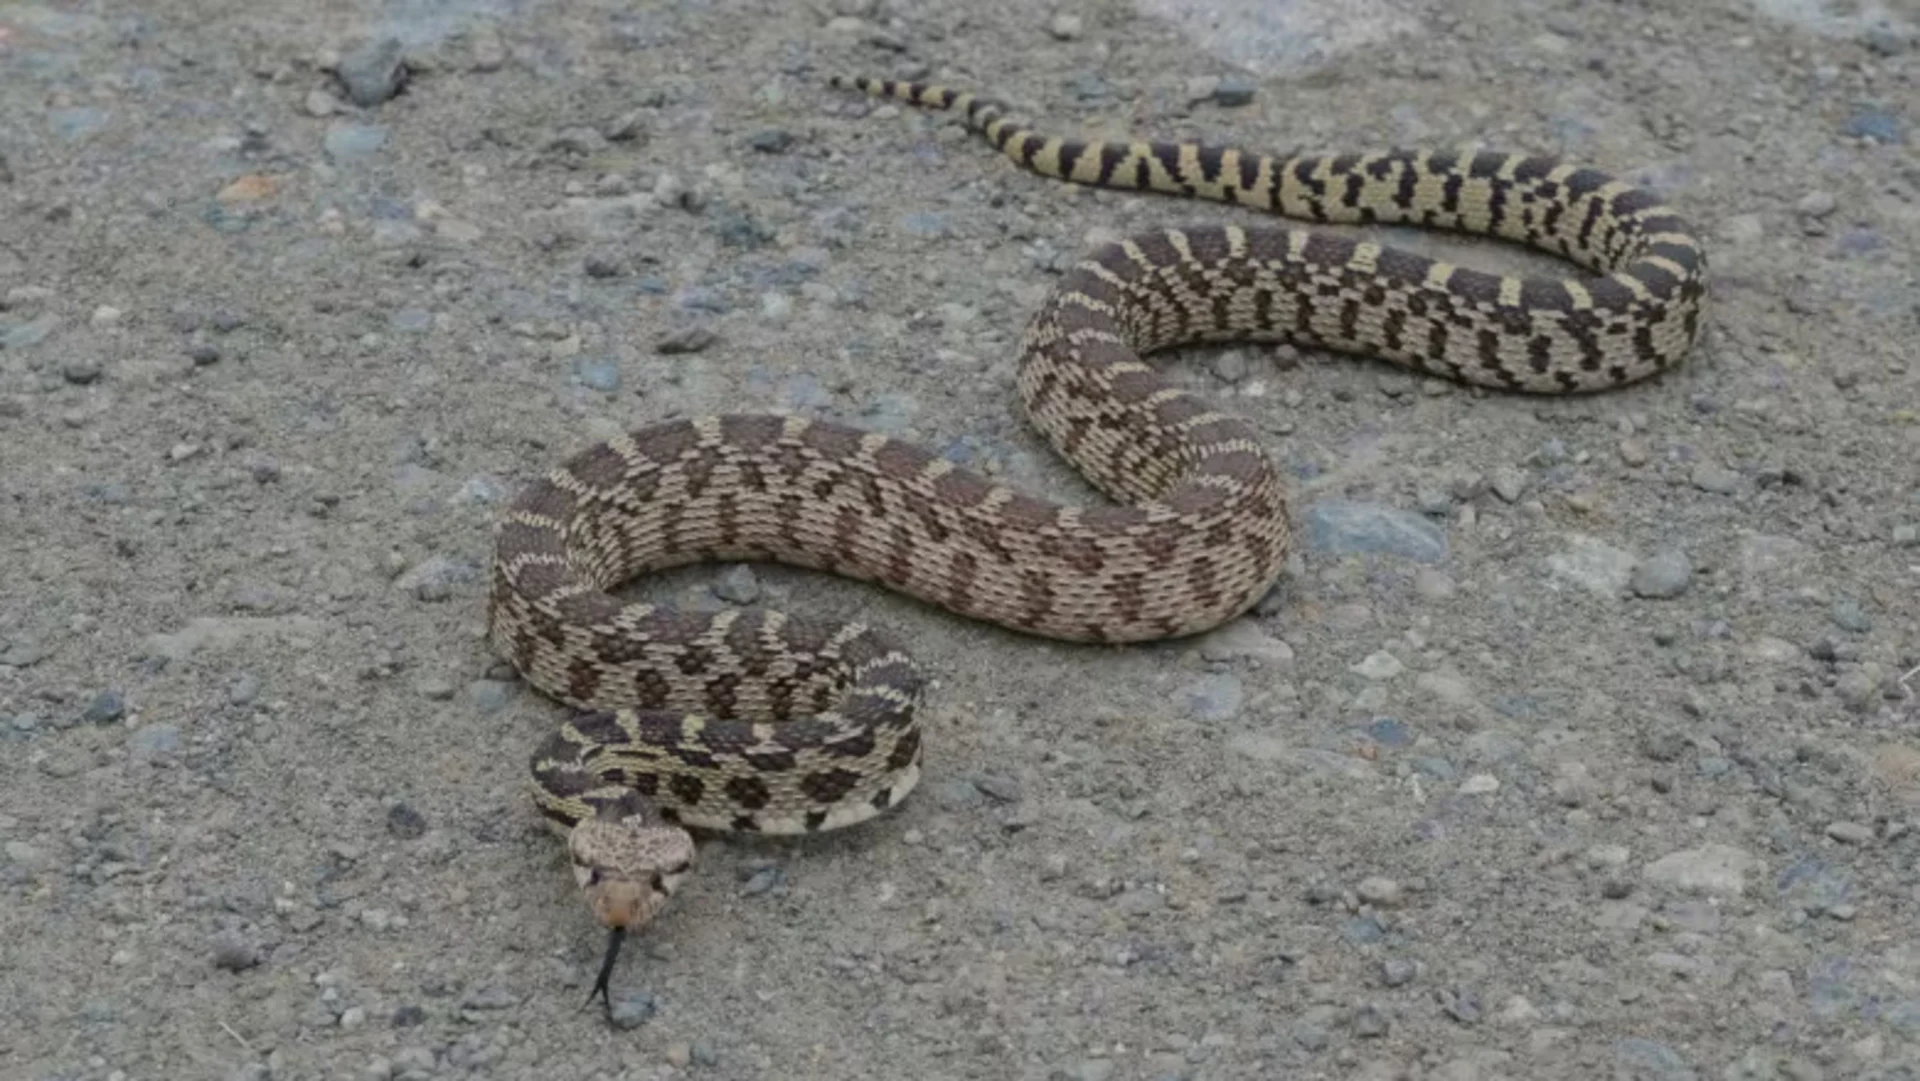 Hot weather waking B.C. snakes from their slumber. Here's how to identify them